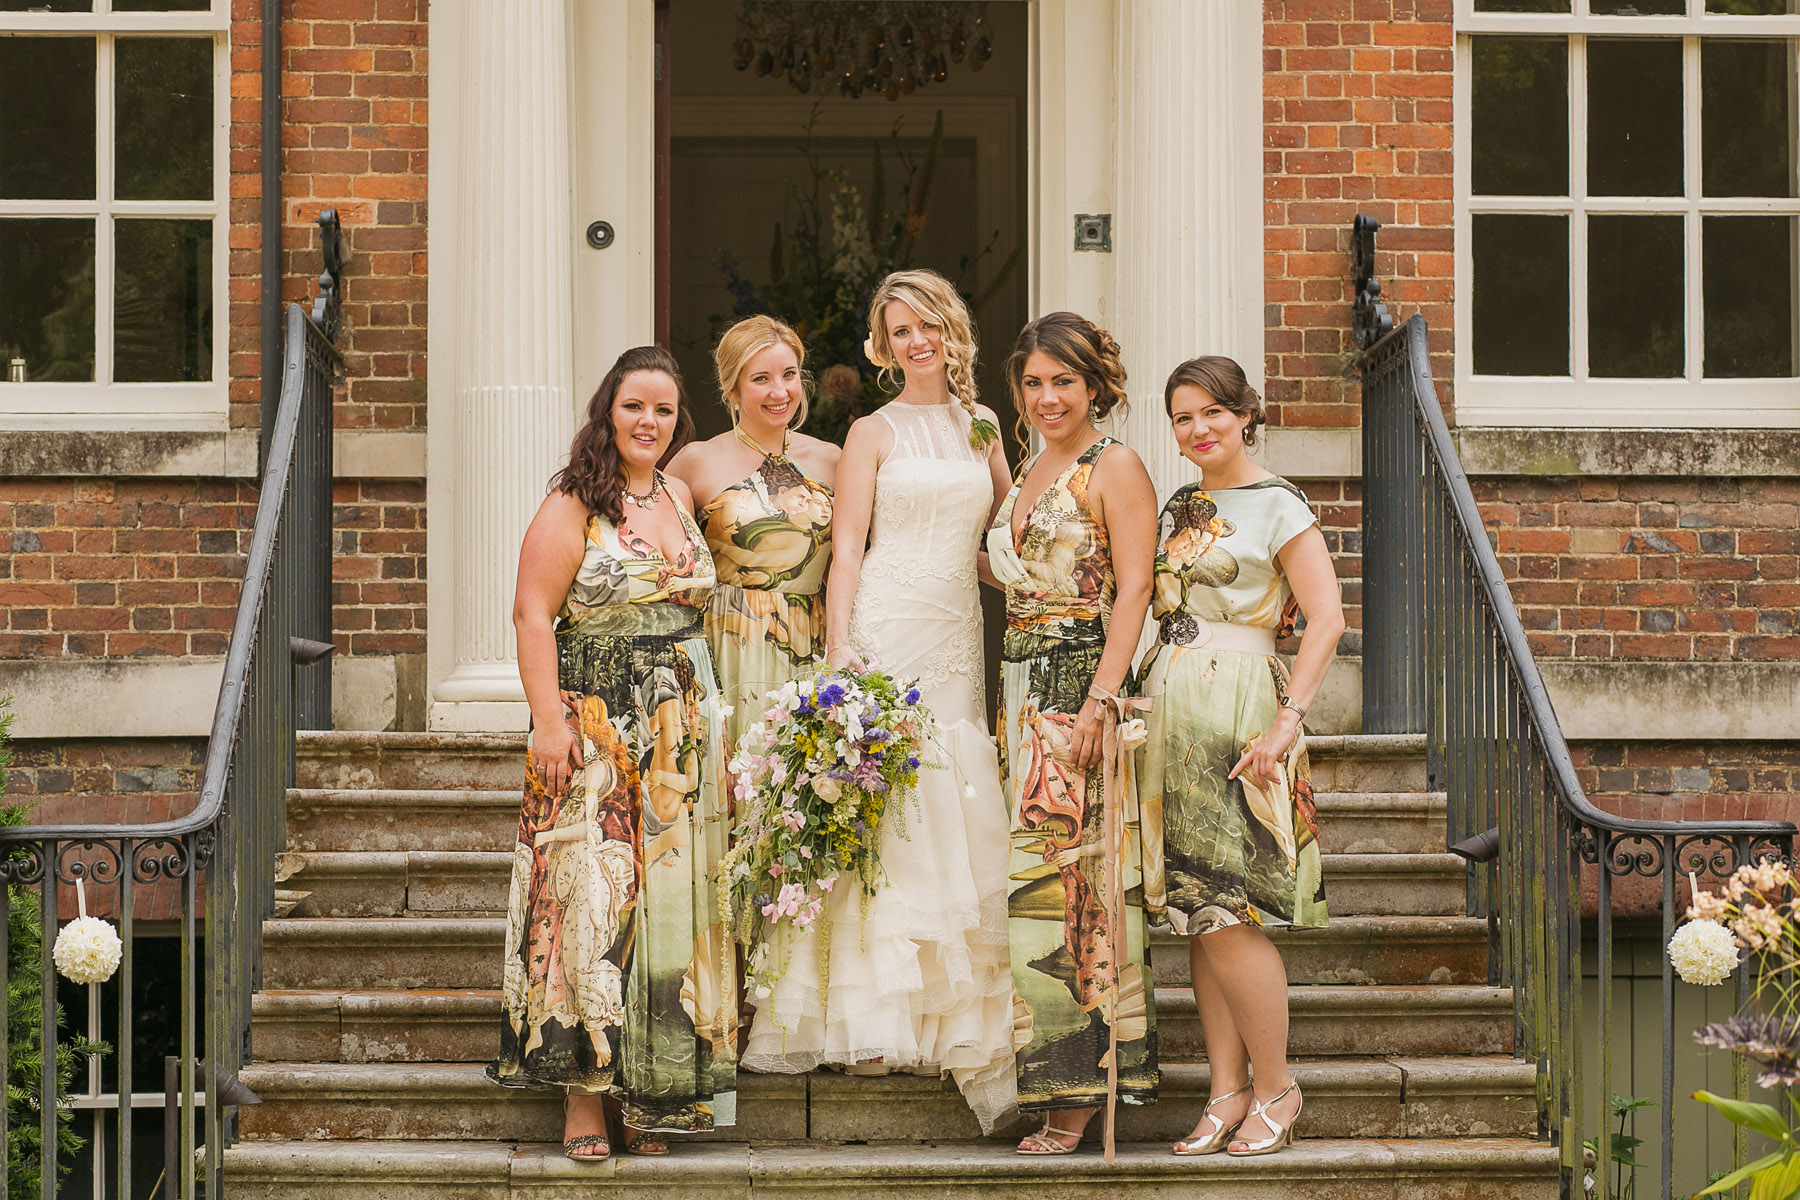 Kirsty + Alistair's laid back stunning wedding at Old Alresford House near Winchester in Hampshire.